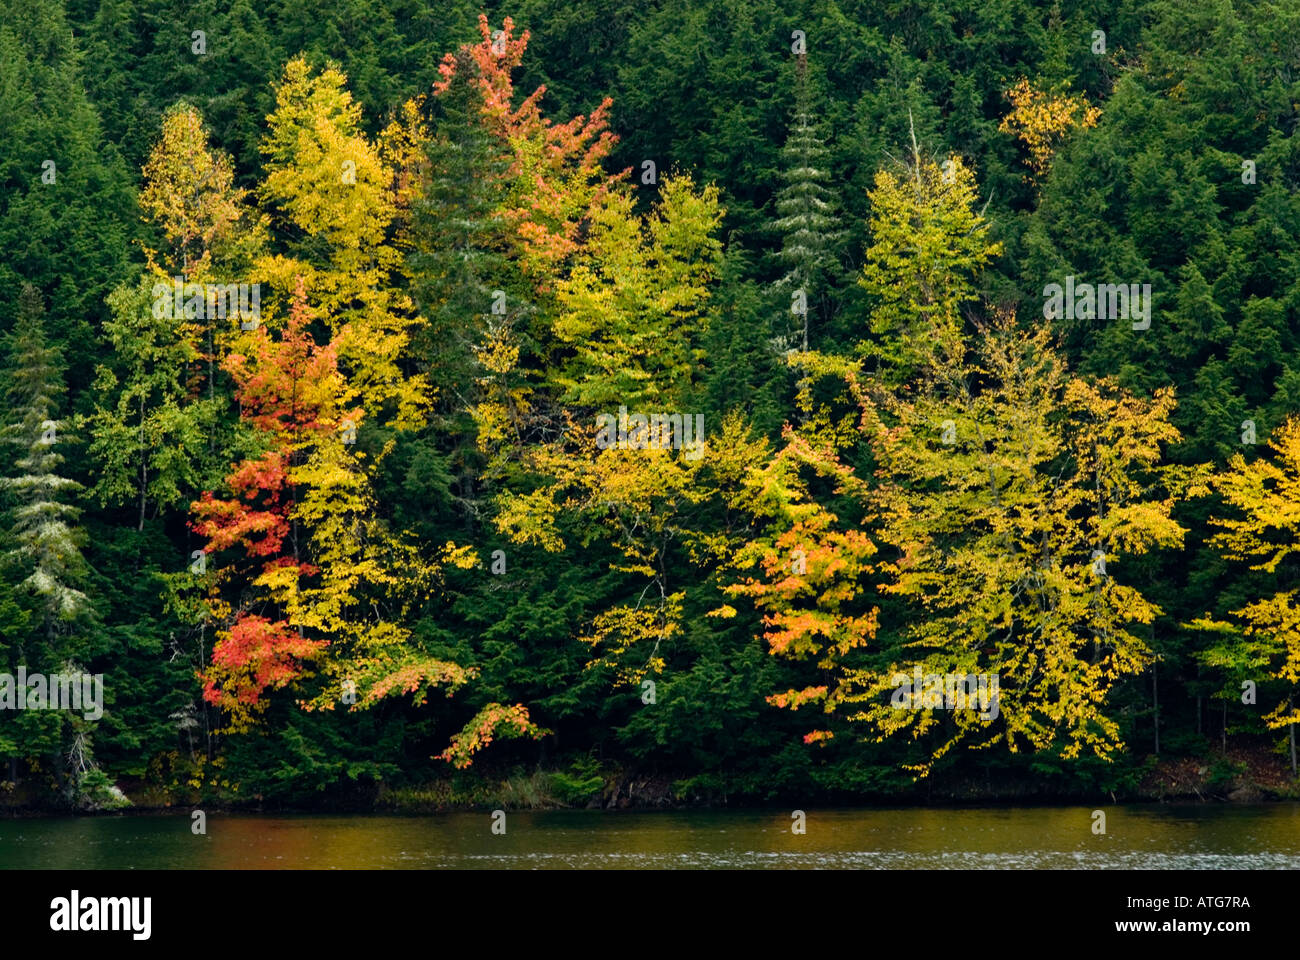 Stock image of hardwoods with bright red maples in full fall colours at the rivers edge in New Brunswick Canada Stock Photo